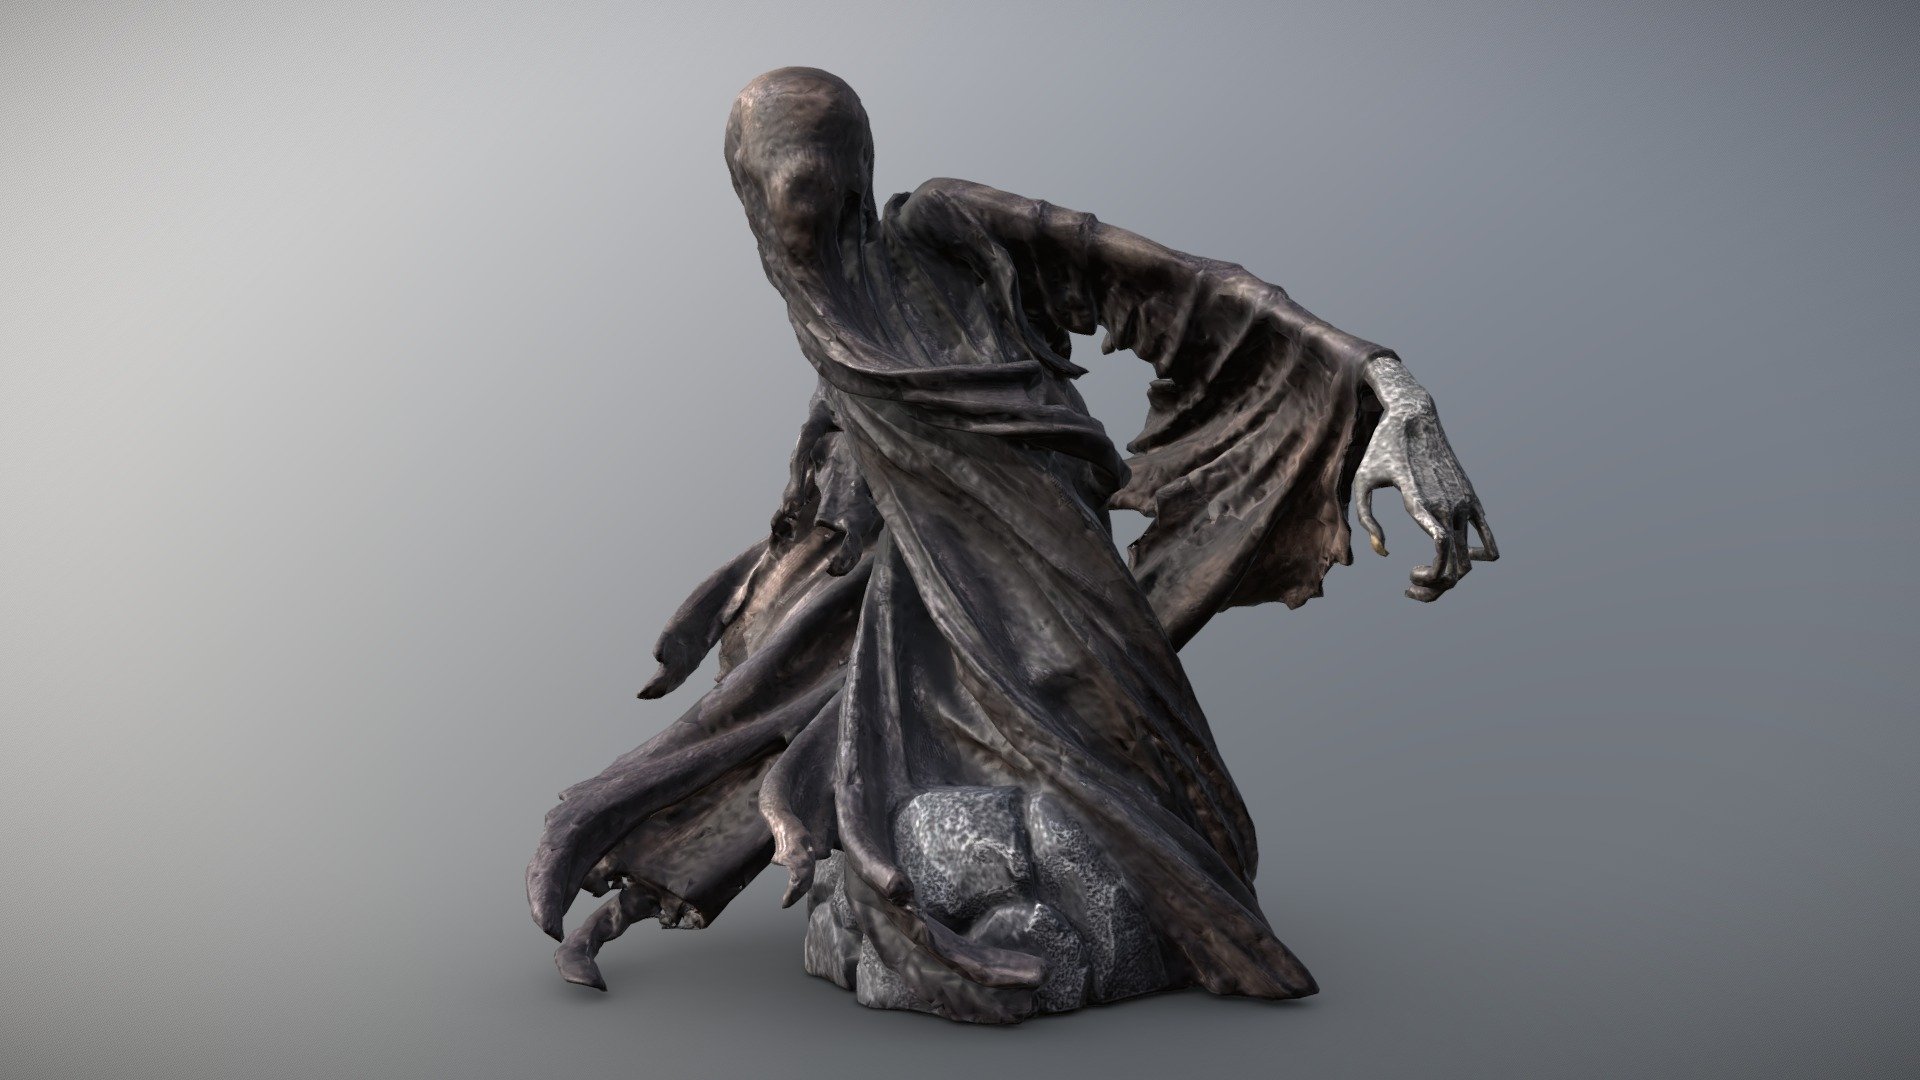 Photogrammetry scanned figurine of a Dementor from Harry Potter. Credits for the physical figurine goes to Gentle Giant Studios 3d model